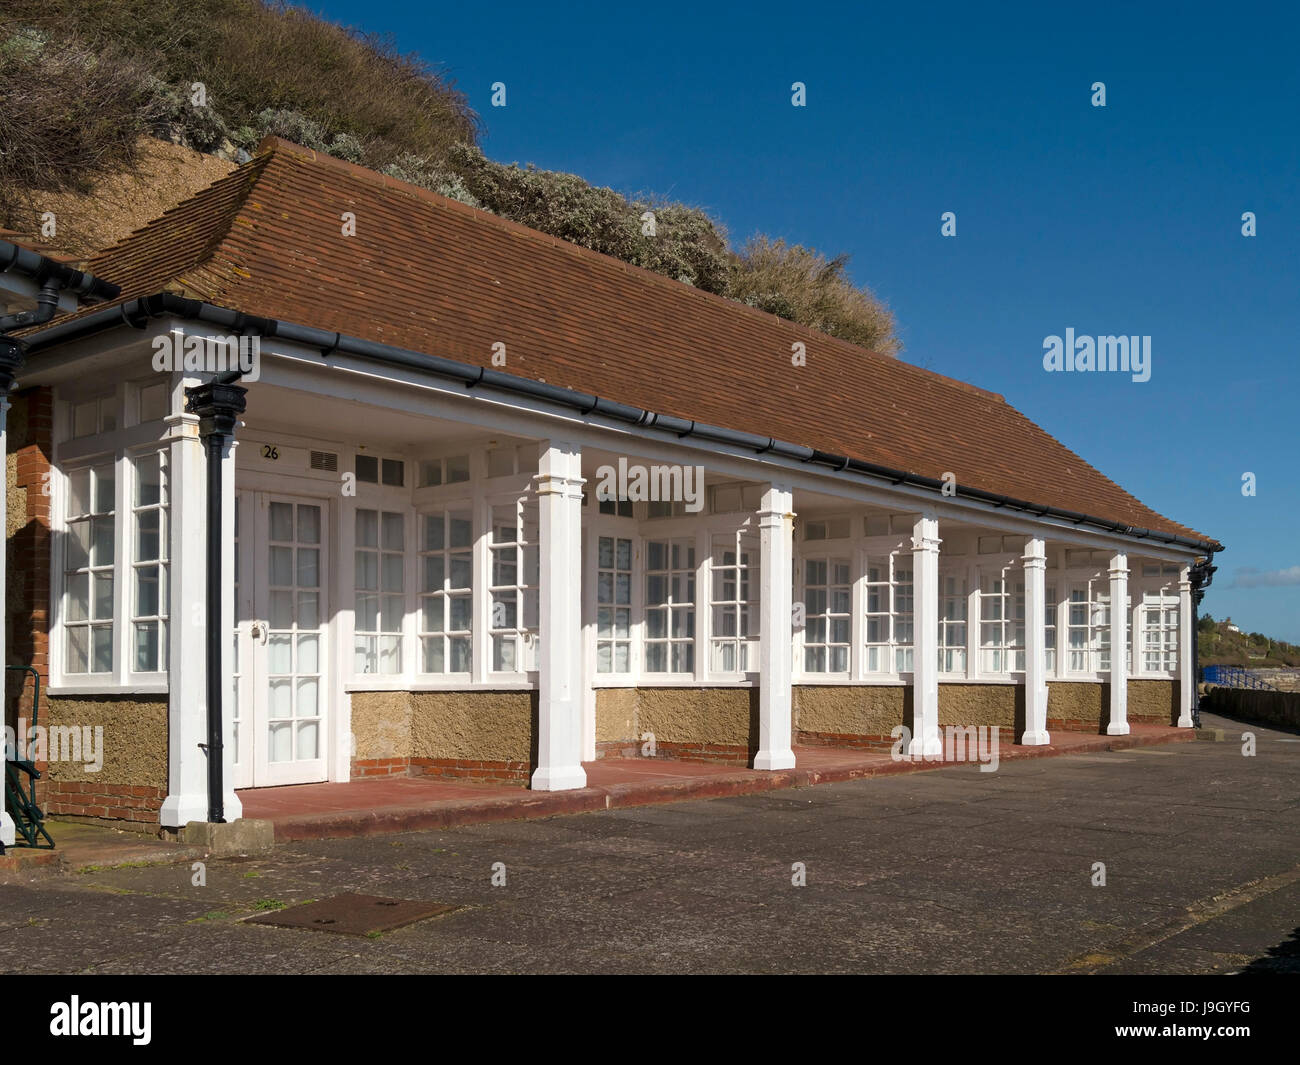 Luxury beach chalets, Eastbourne promenade, East Sussex, England, UK Stock Photo